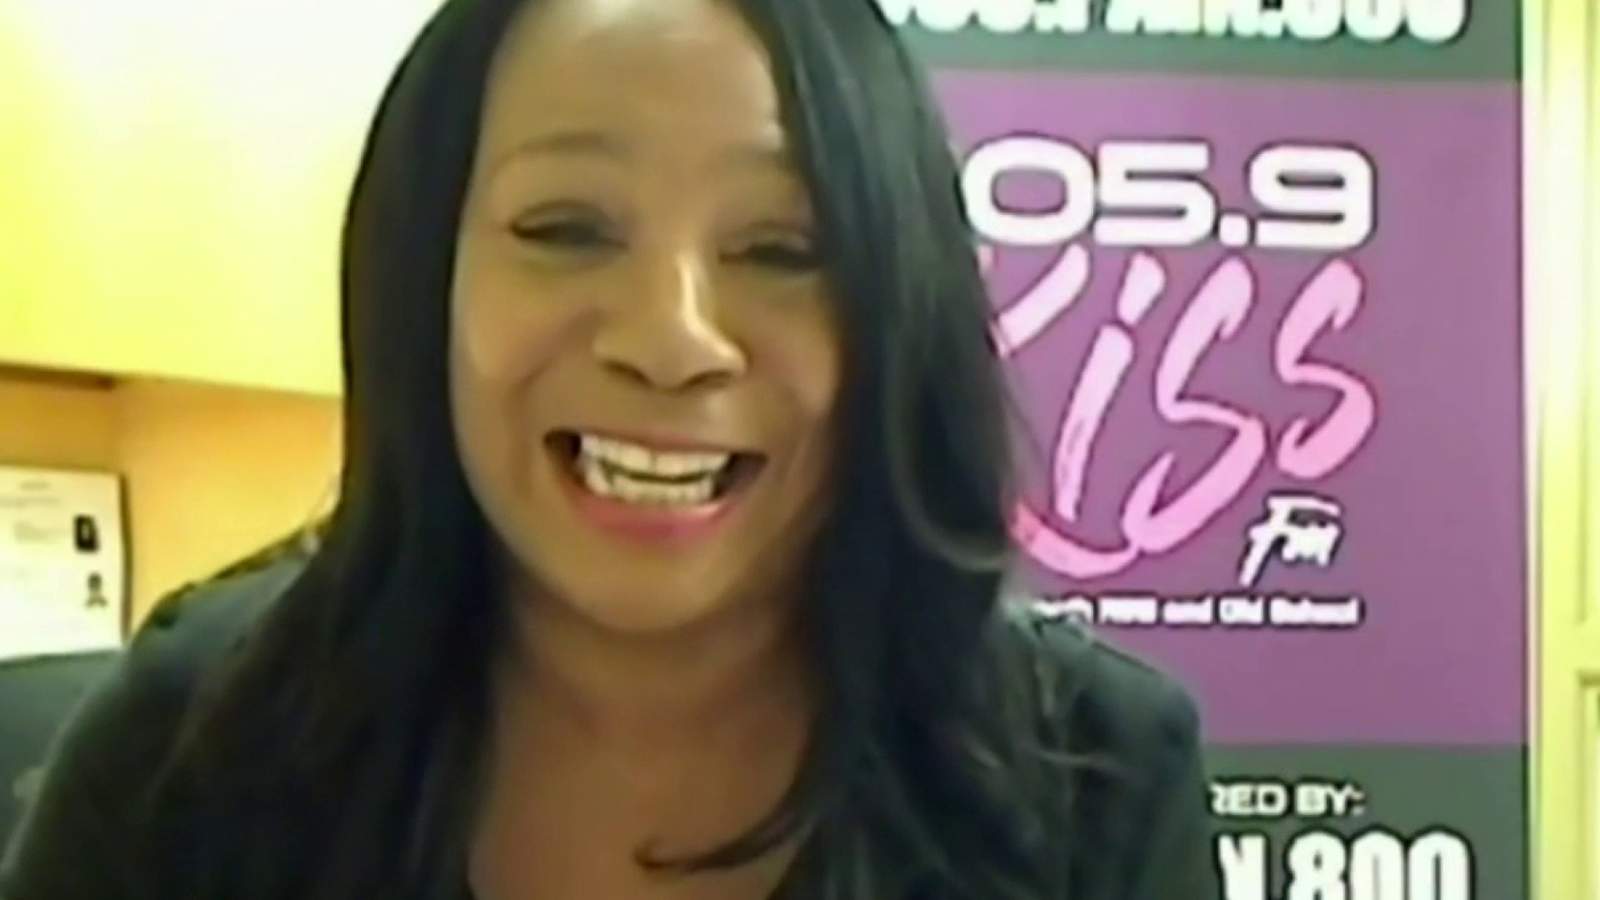 Detroit radio personality Angie Starr encourages voting through music